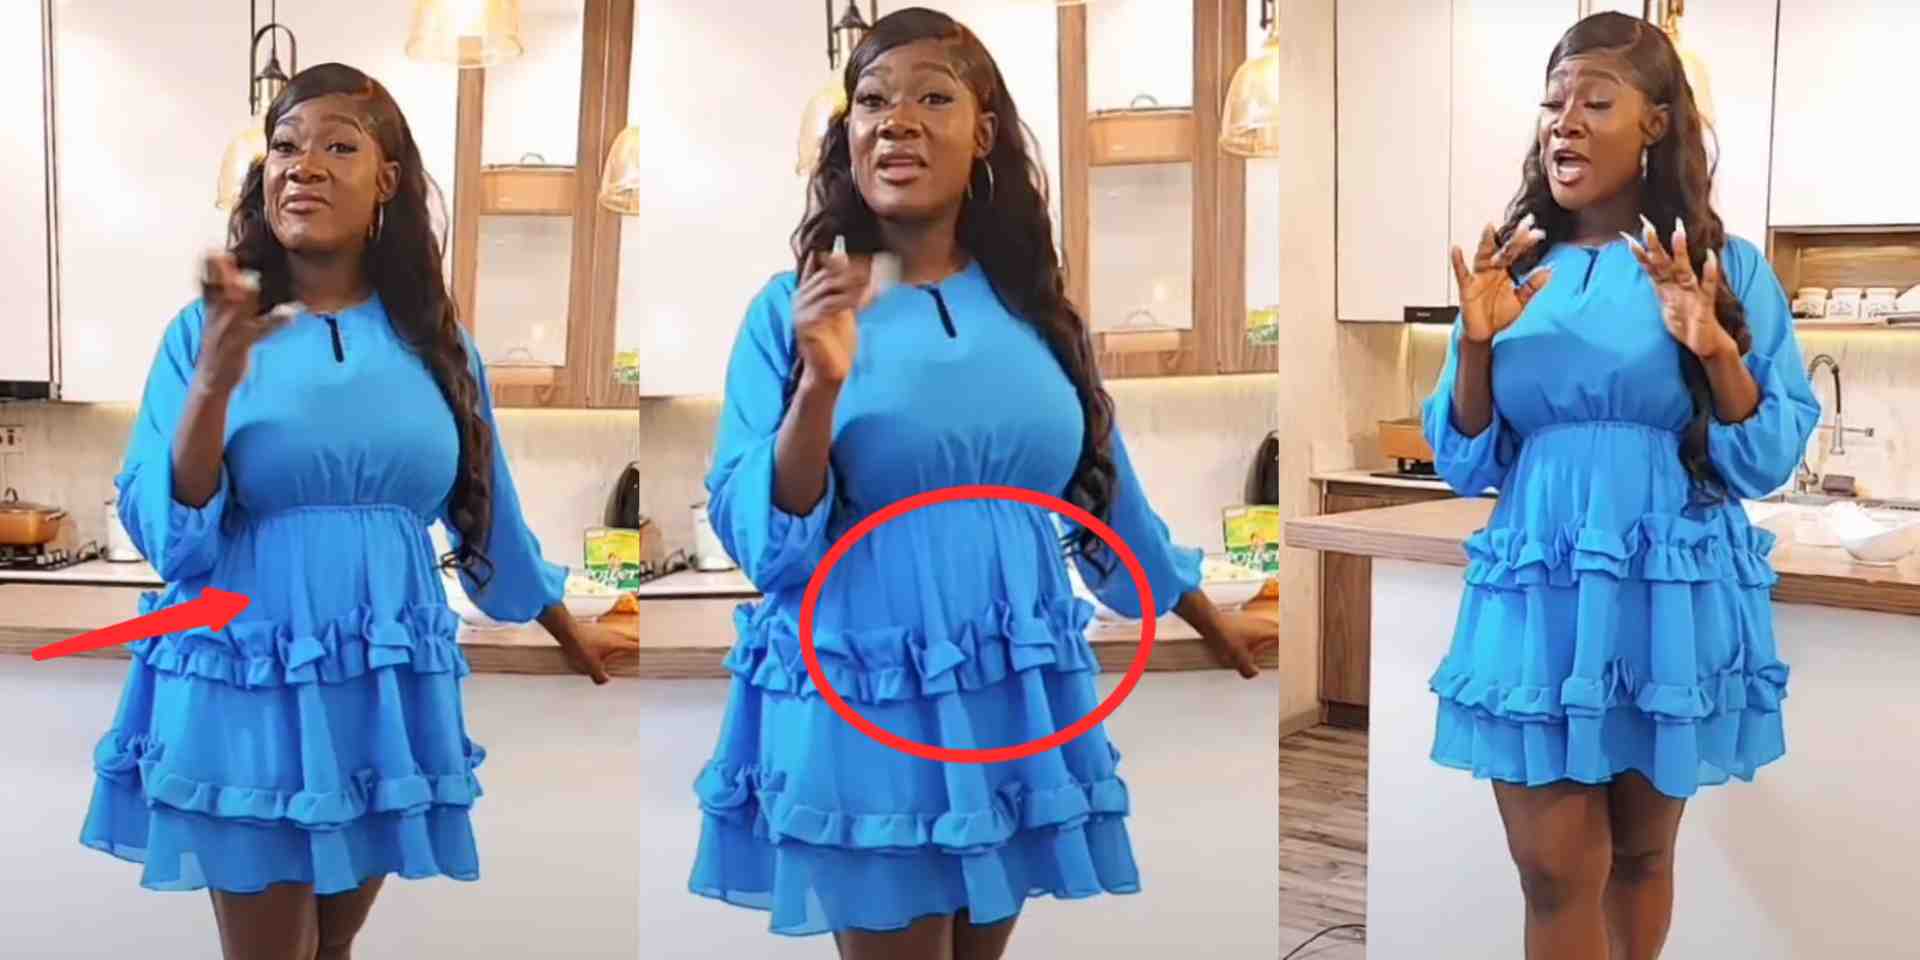 Mercy Johnson reacts to claims of expecting a 5th child following visible baby bump in recent video